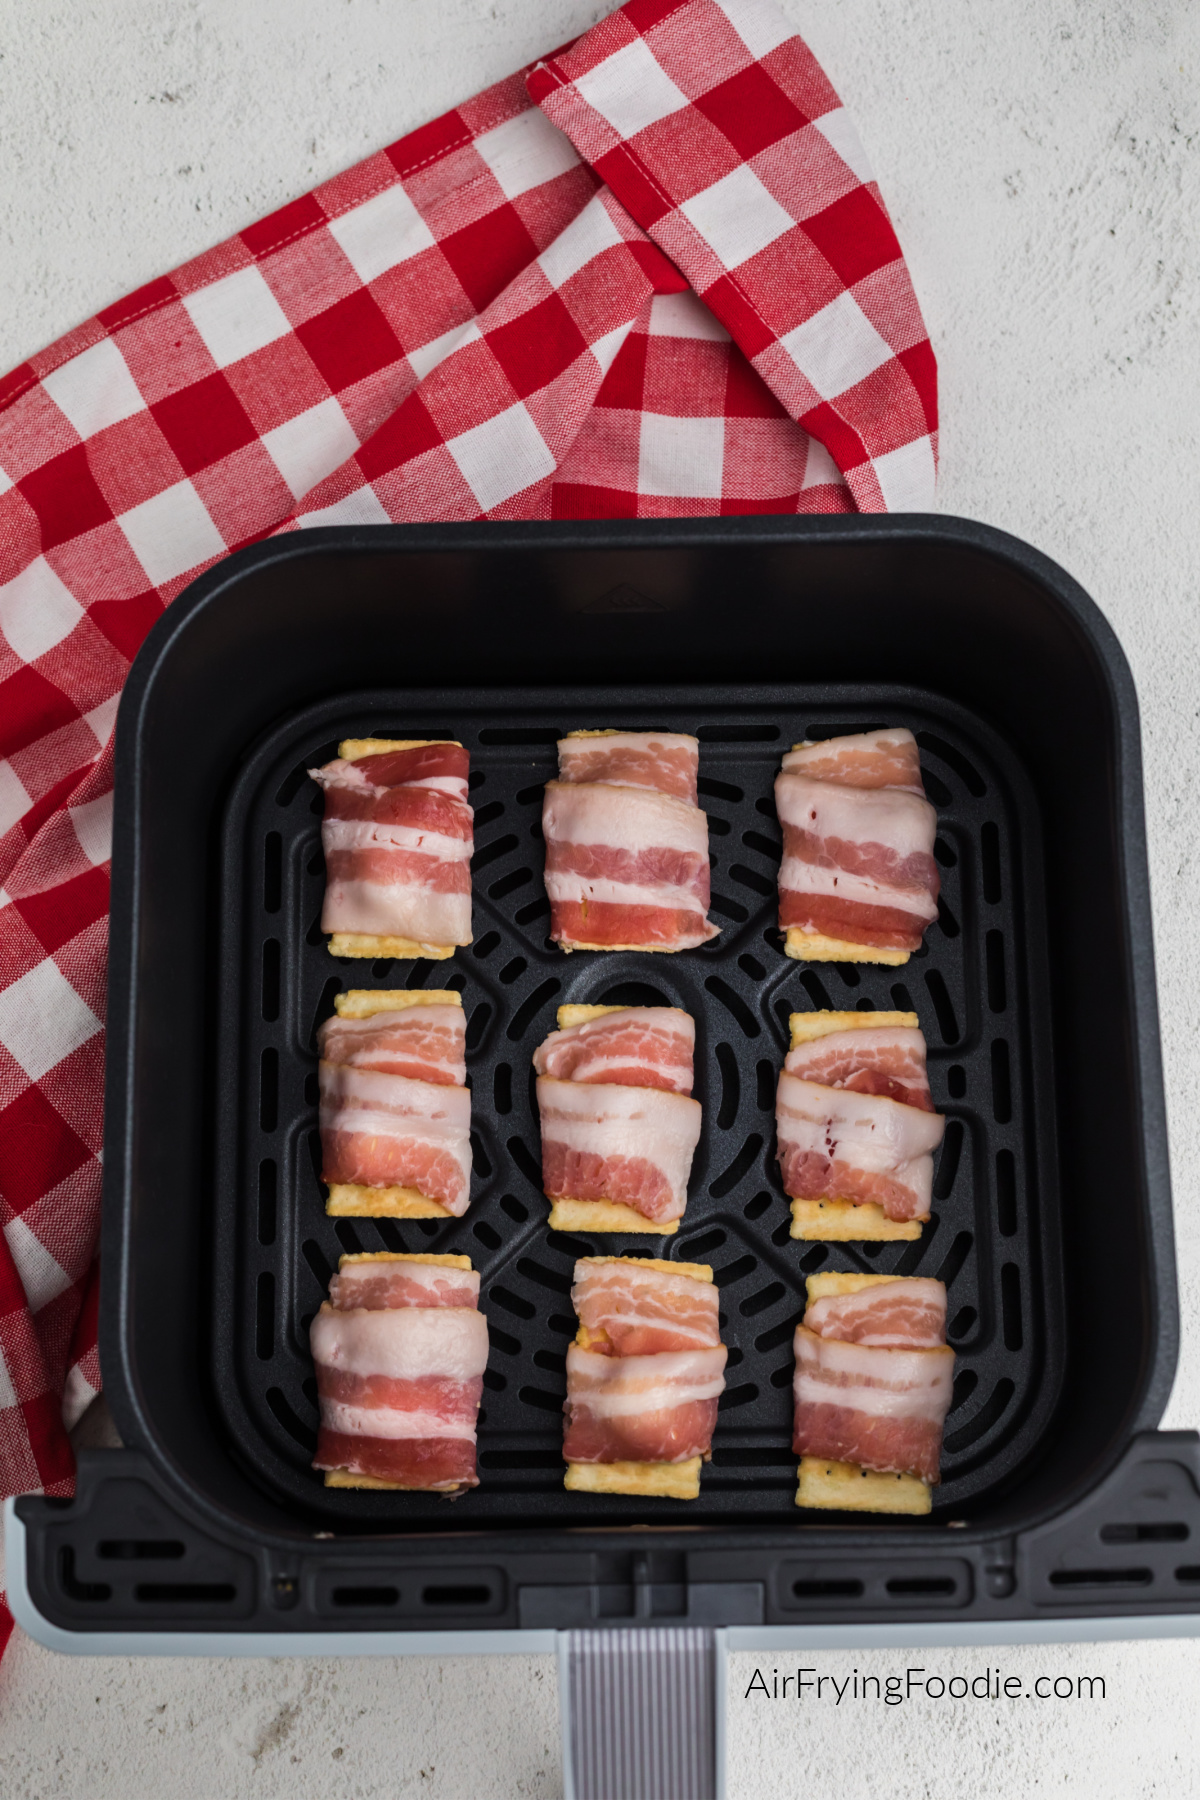 Bacon wrapped cream cheese crackers in the air fryer basket.